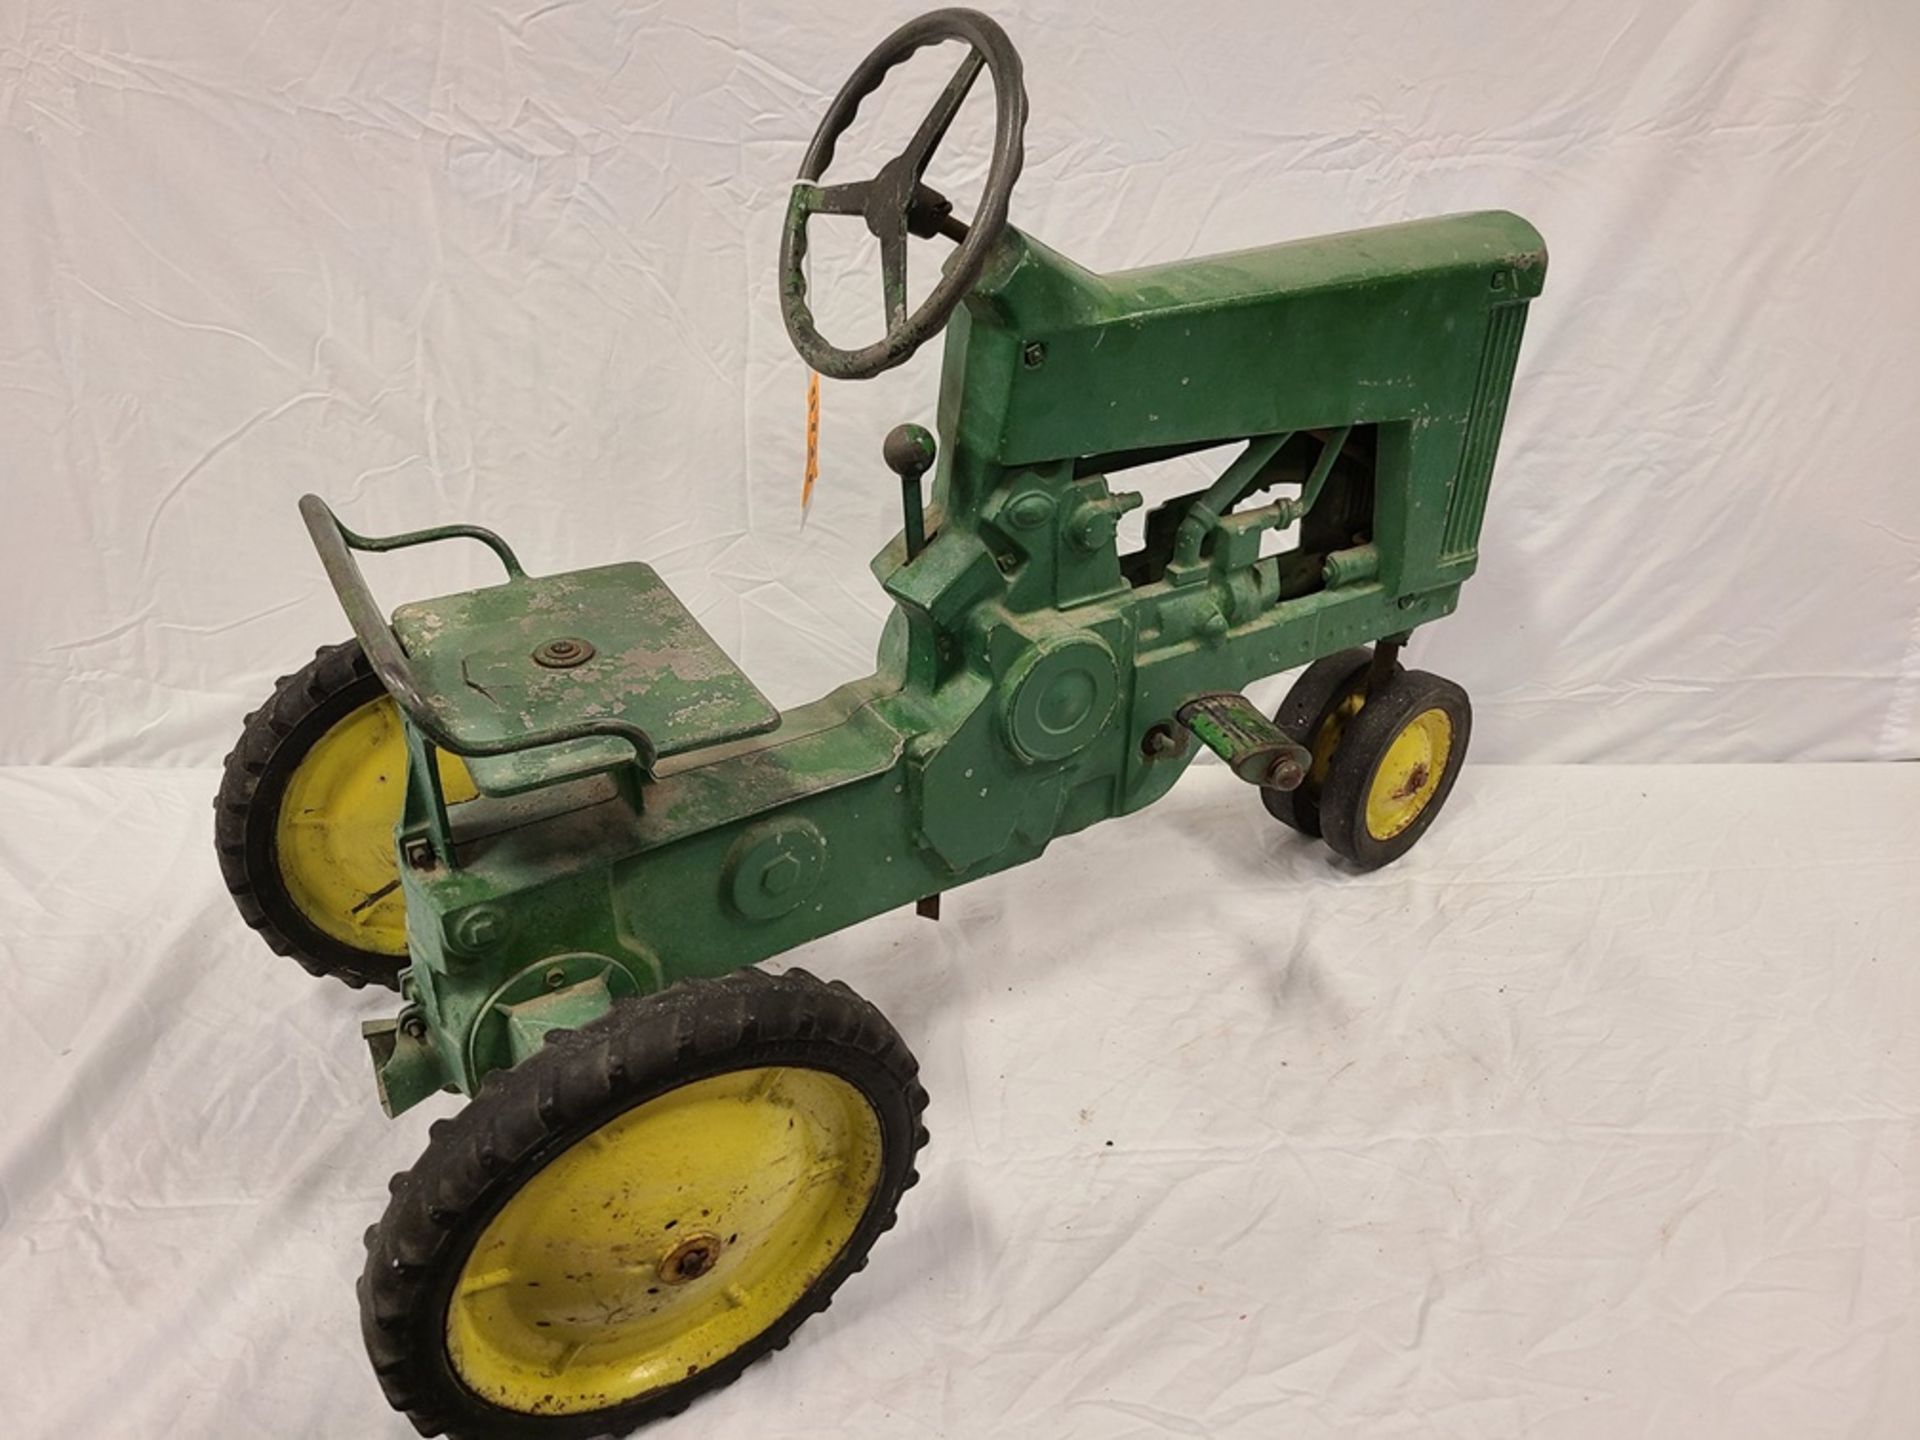 green and yellow "Tractor" tricycle pedal tractor - Image 2 of 2